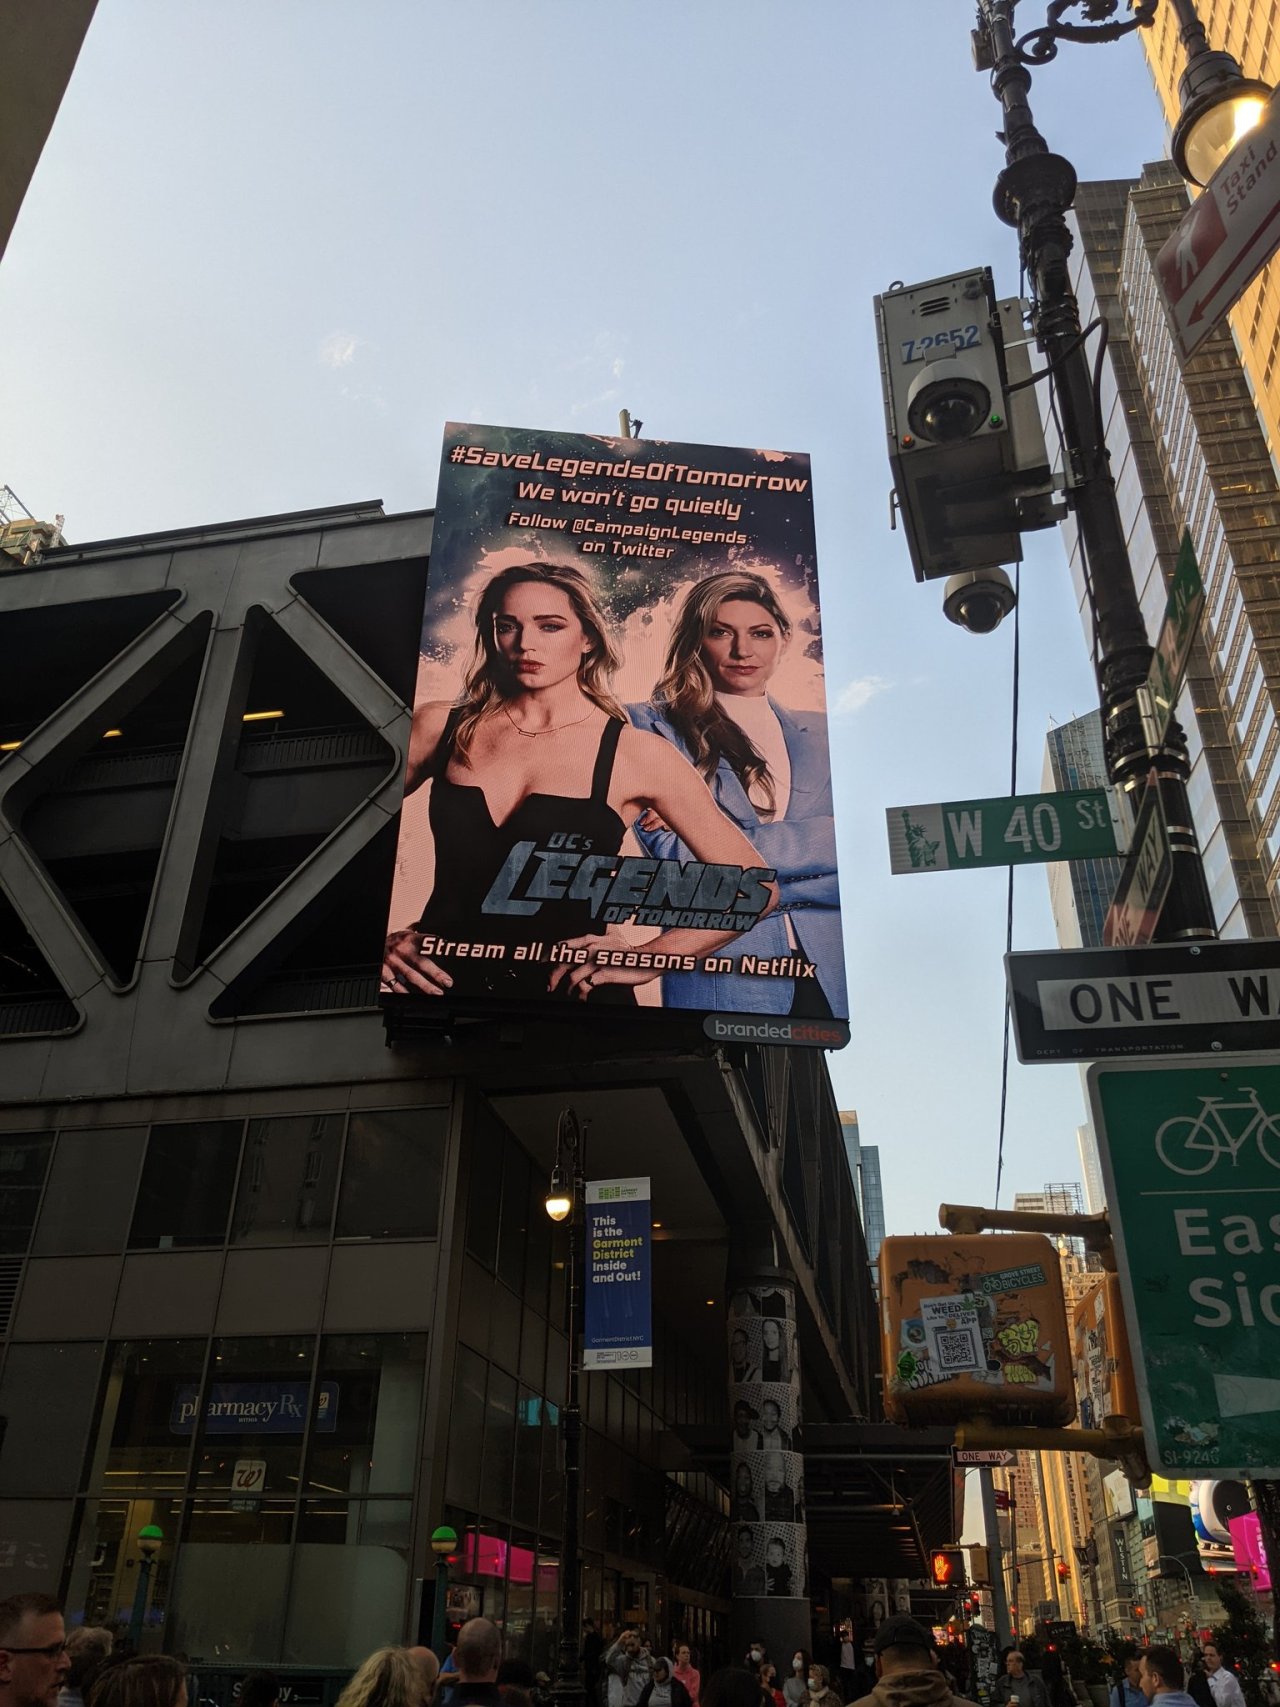 Time wives take over New York. #legends of tomorrow #avalance#caity lotz#jes macallan#feels right #(i did not take these photo i linked to the twitter who did in the caption)